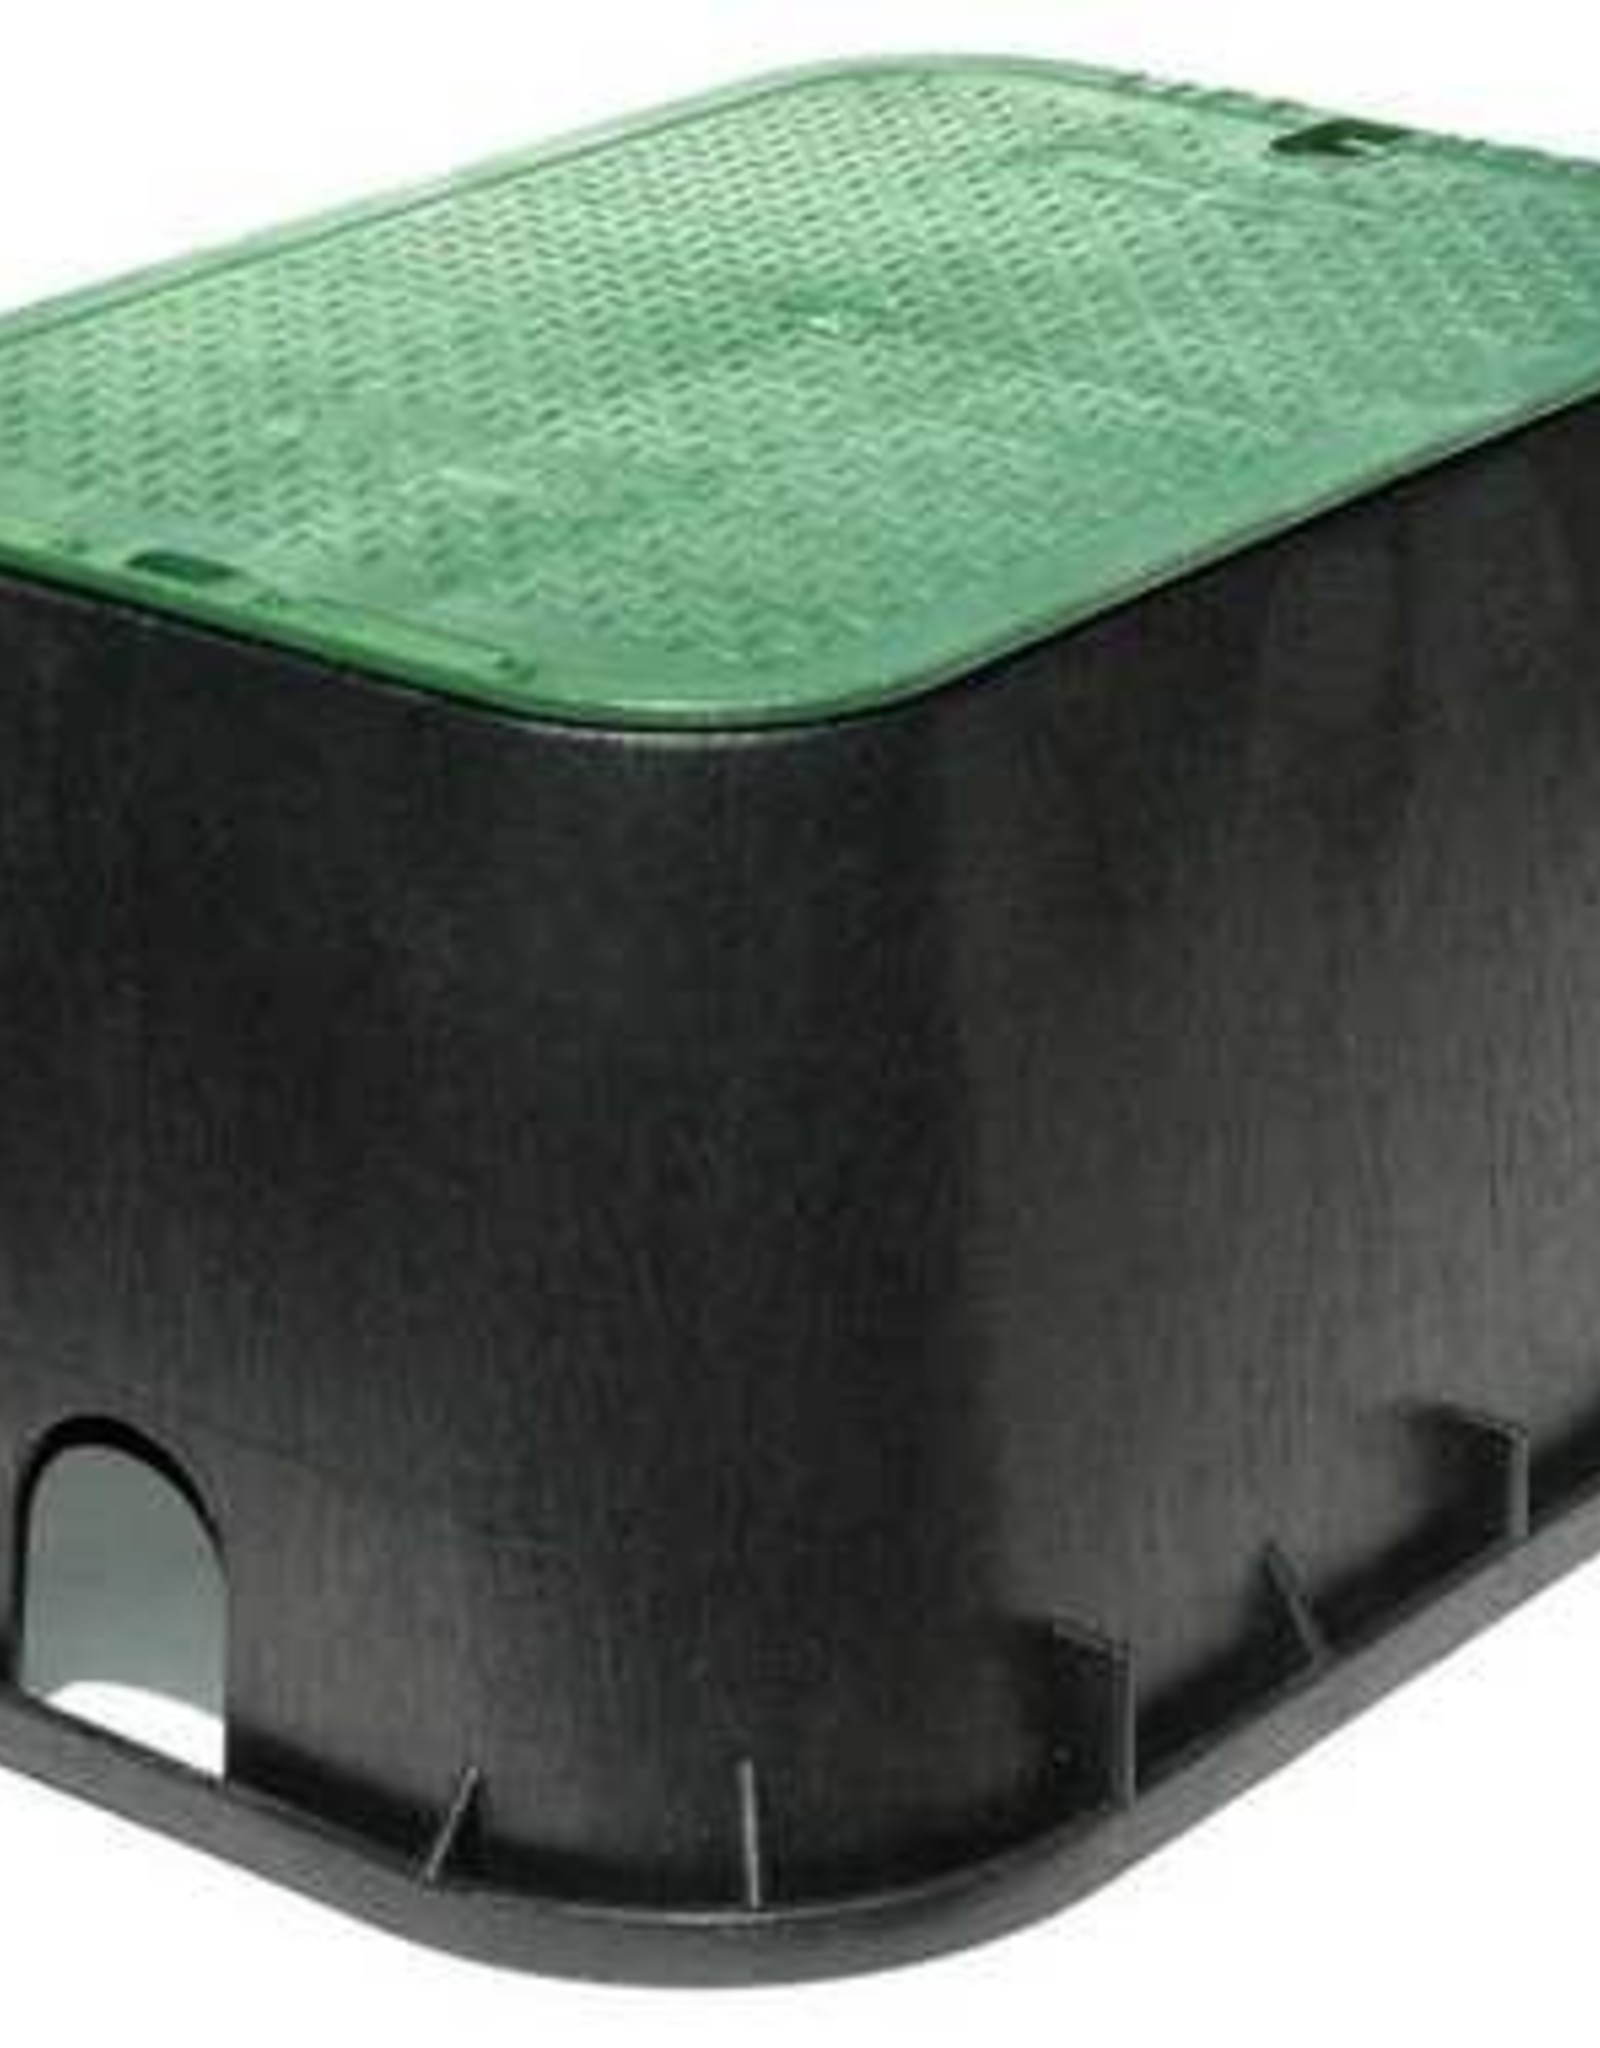 NDS Drainage NDS Jumbo Valve Box with Overlapping Cover, Black/Green, 12" x 20" 117BC